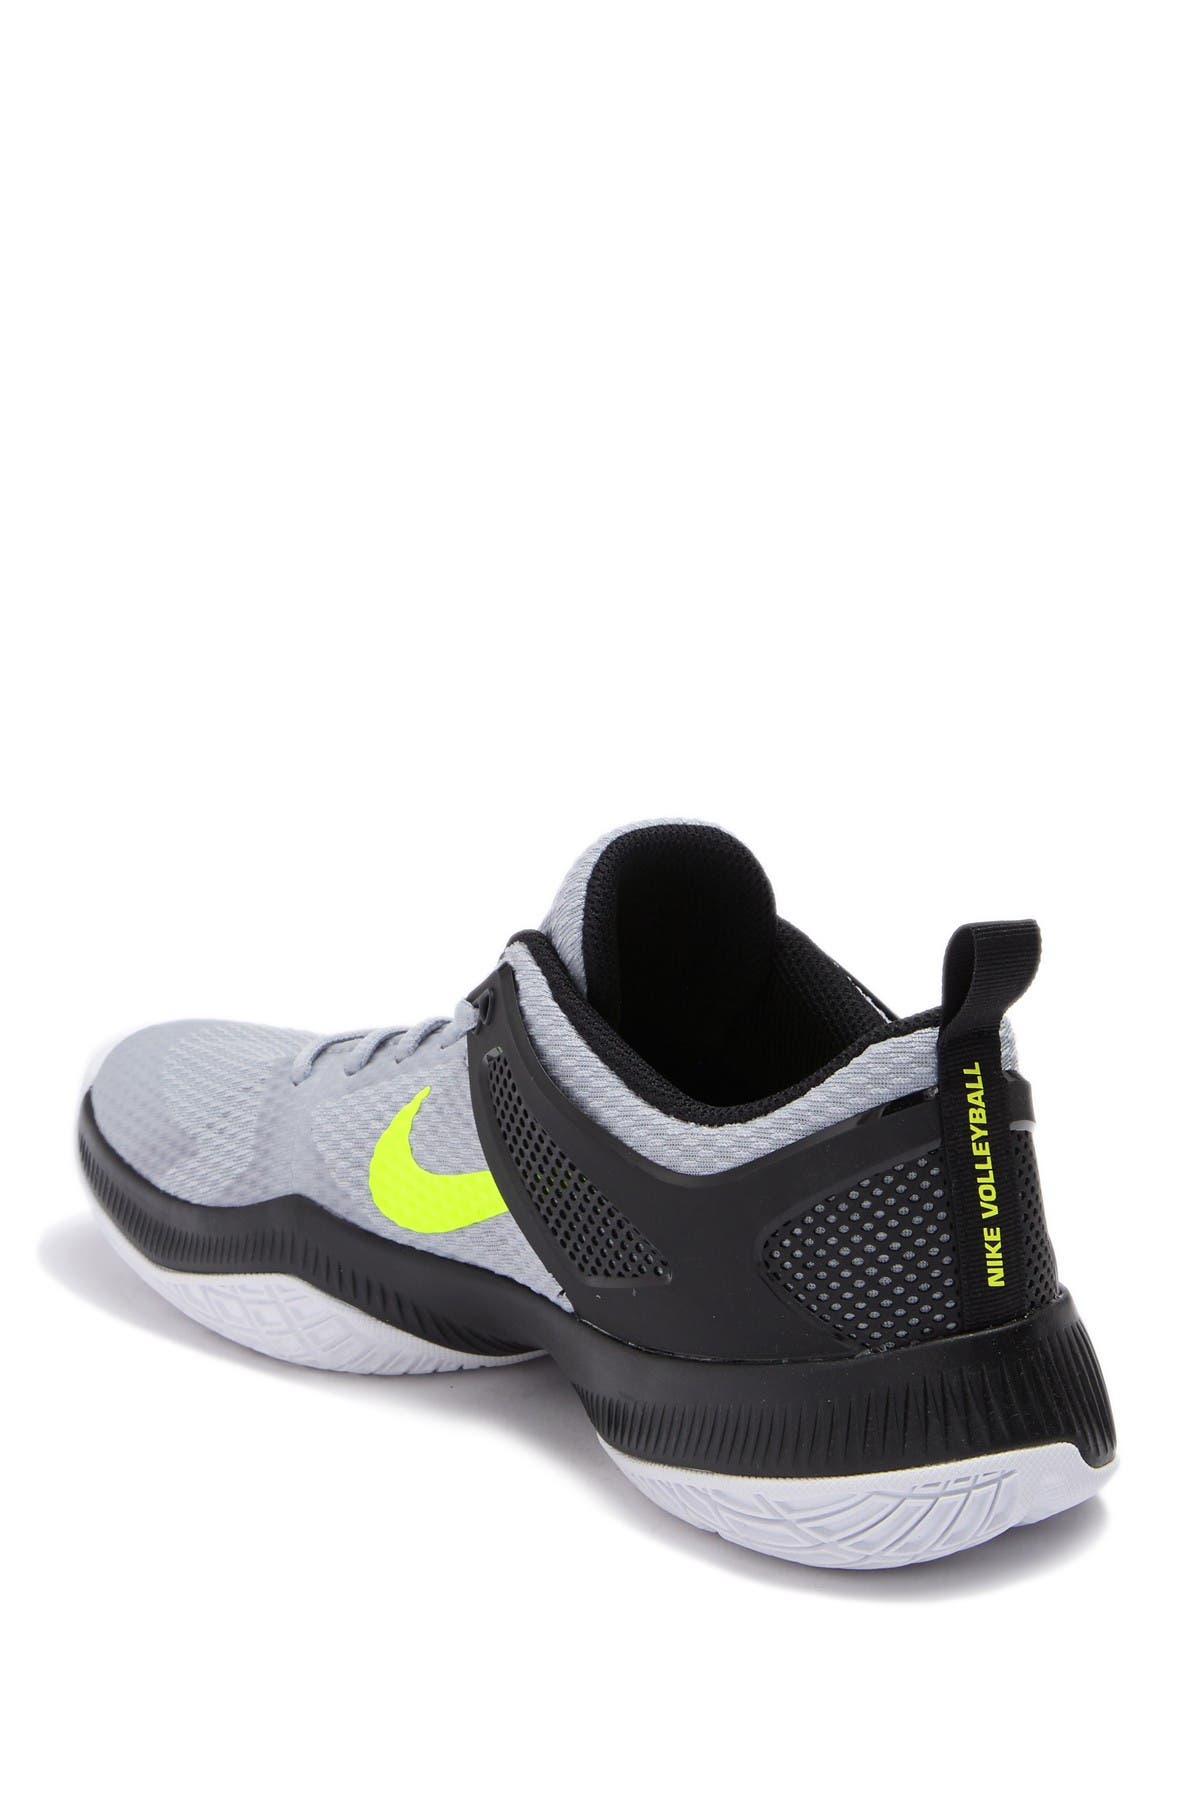 nike air zoom hyperattack volleyball shoes